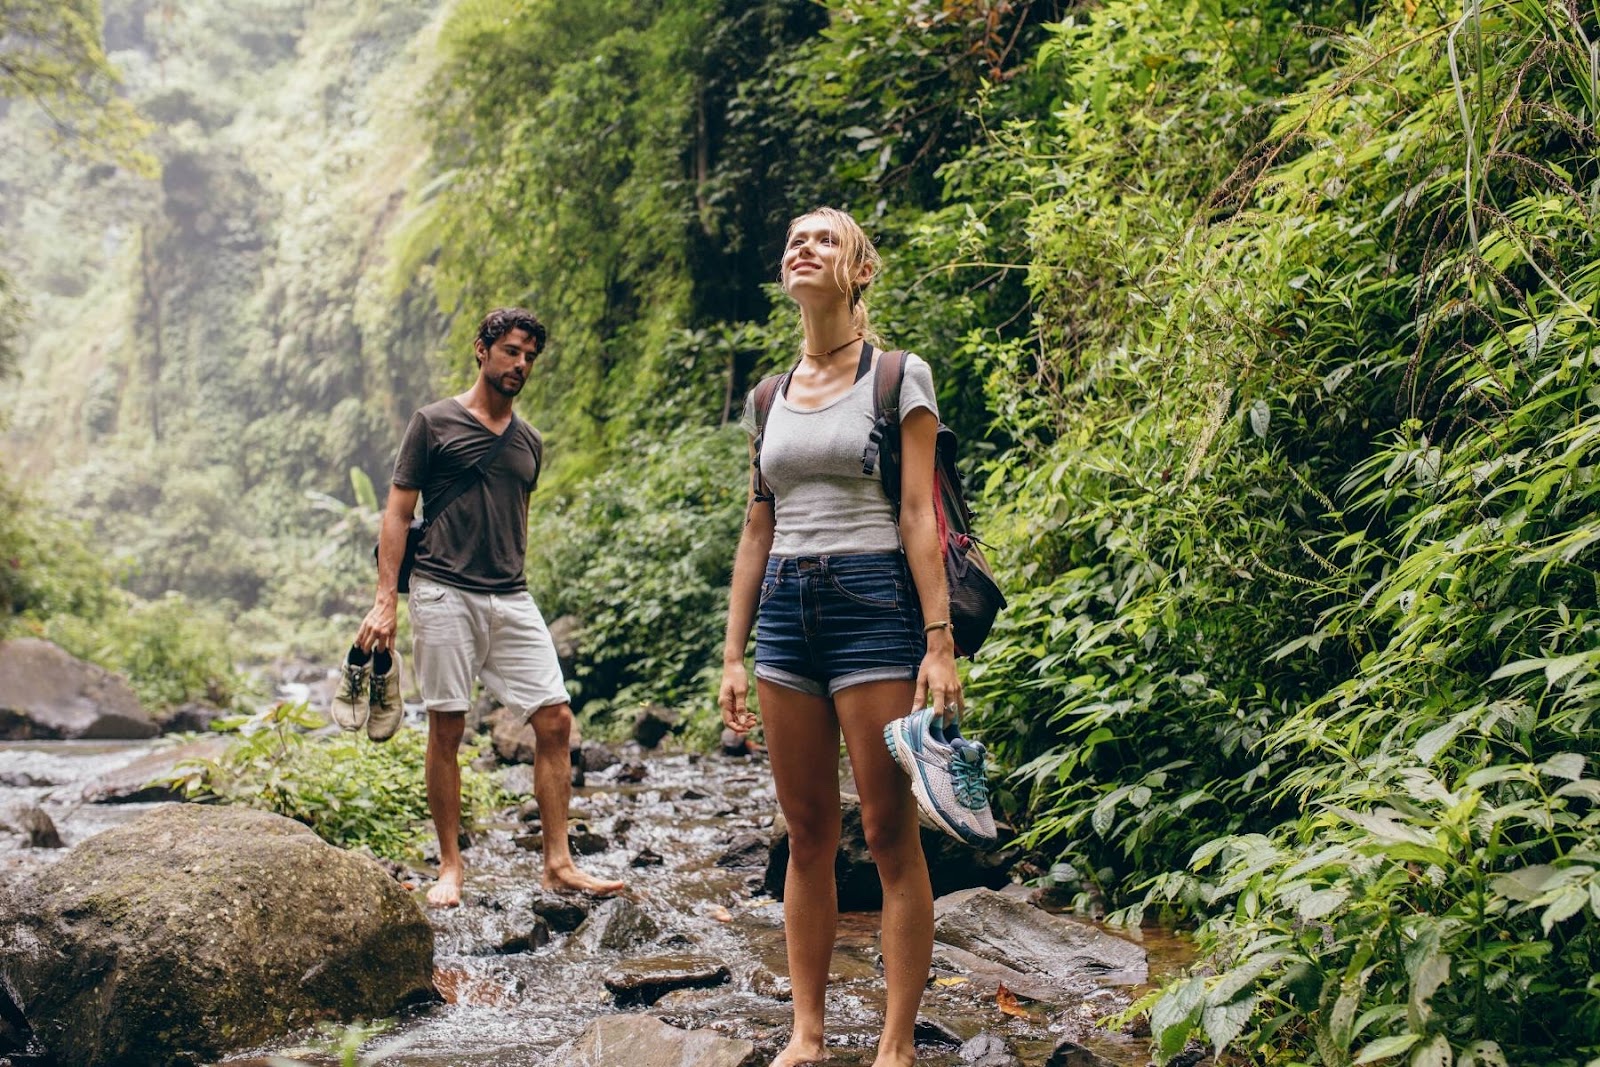 costa rica trips for couples